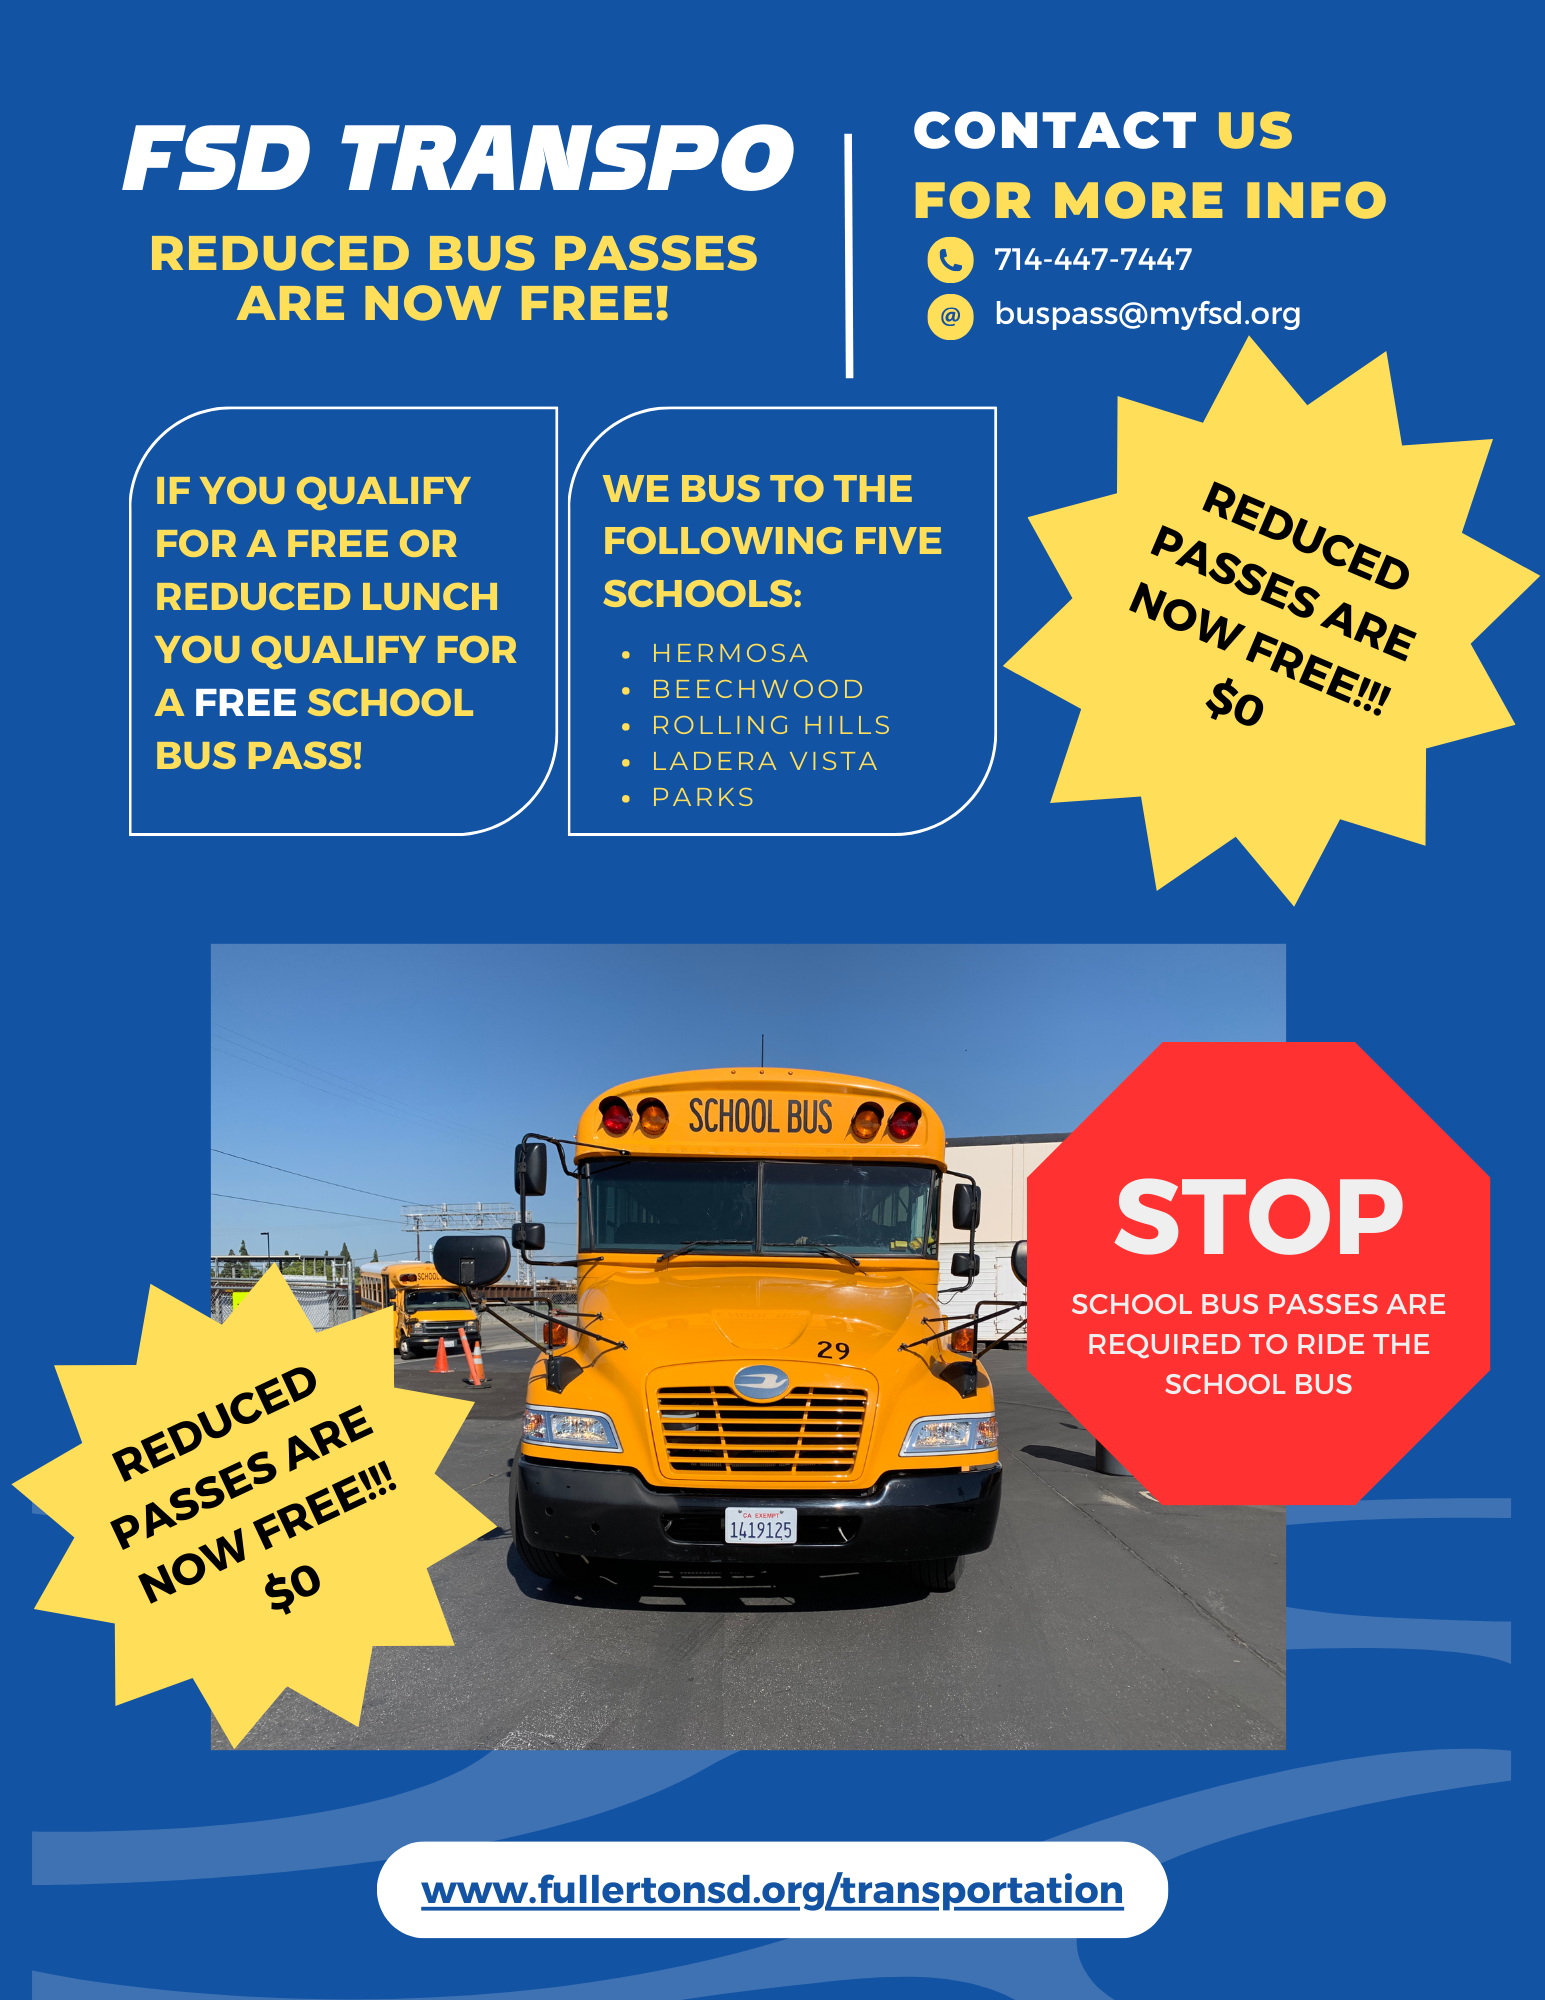 If you qualified for a reduced lunch you now are qualified for a free bus pass.  Please contact 714.447.7447